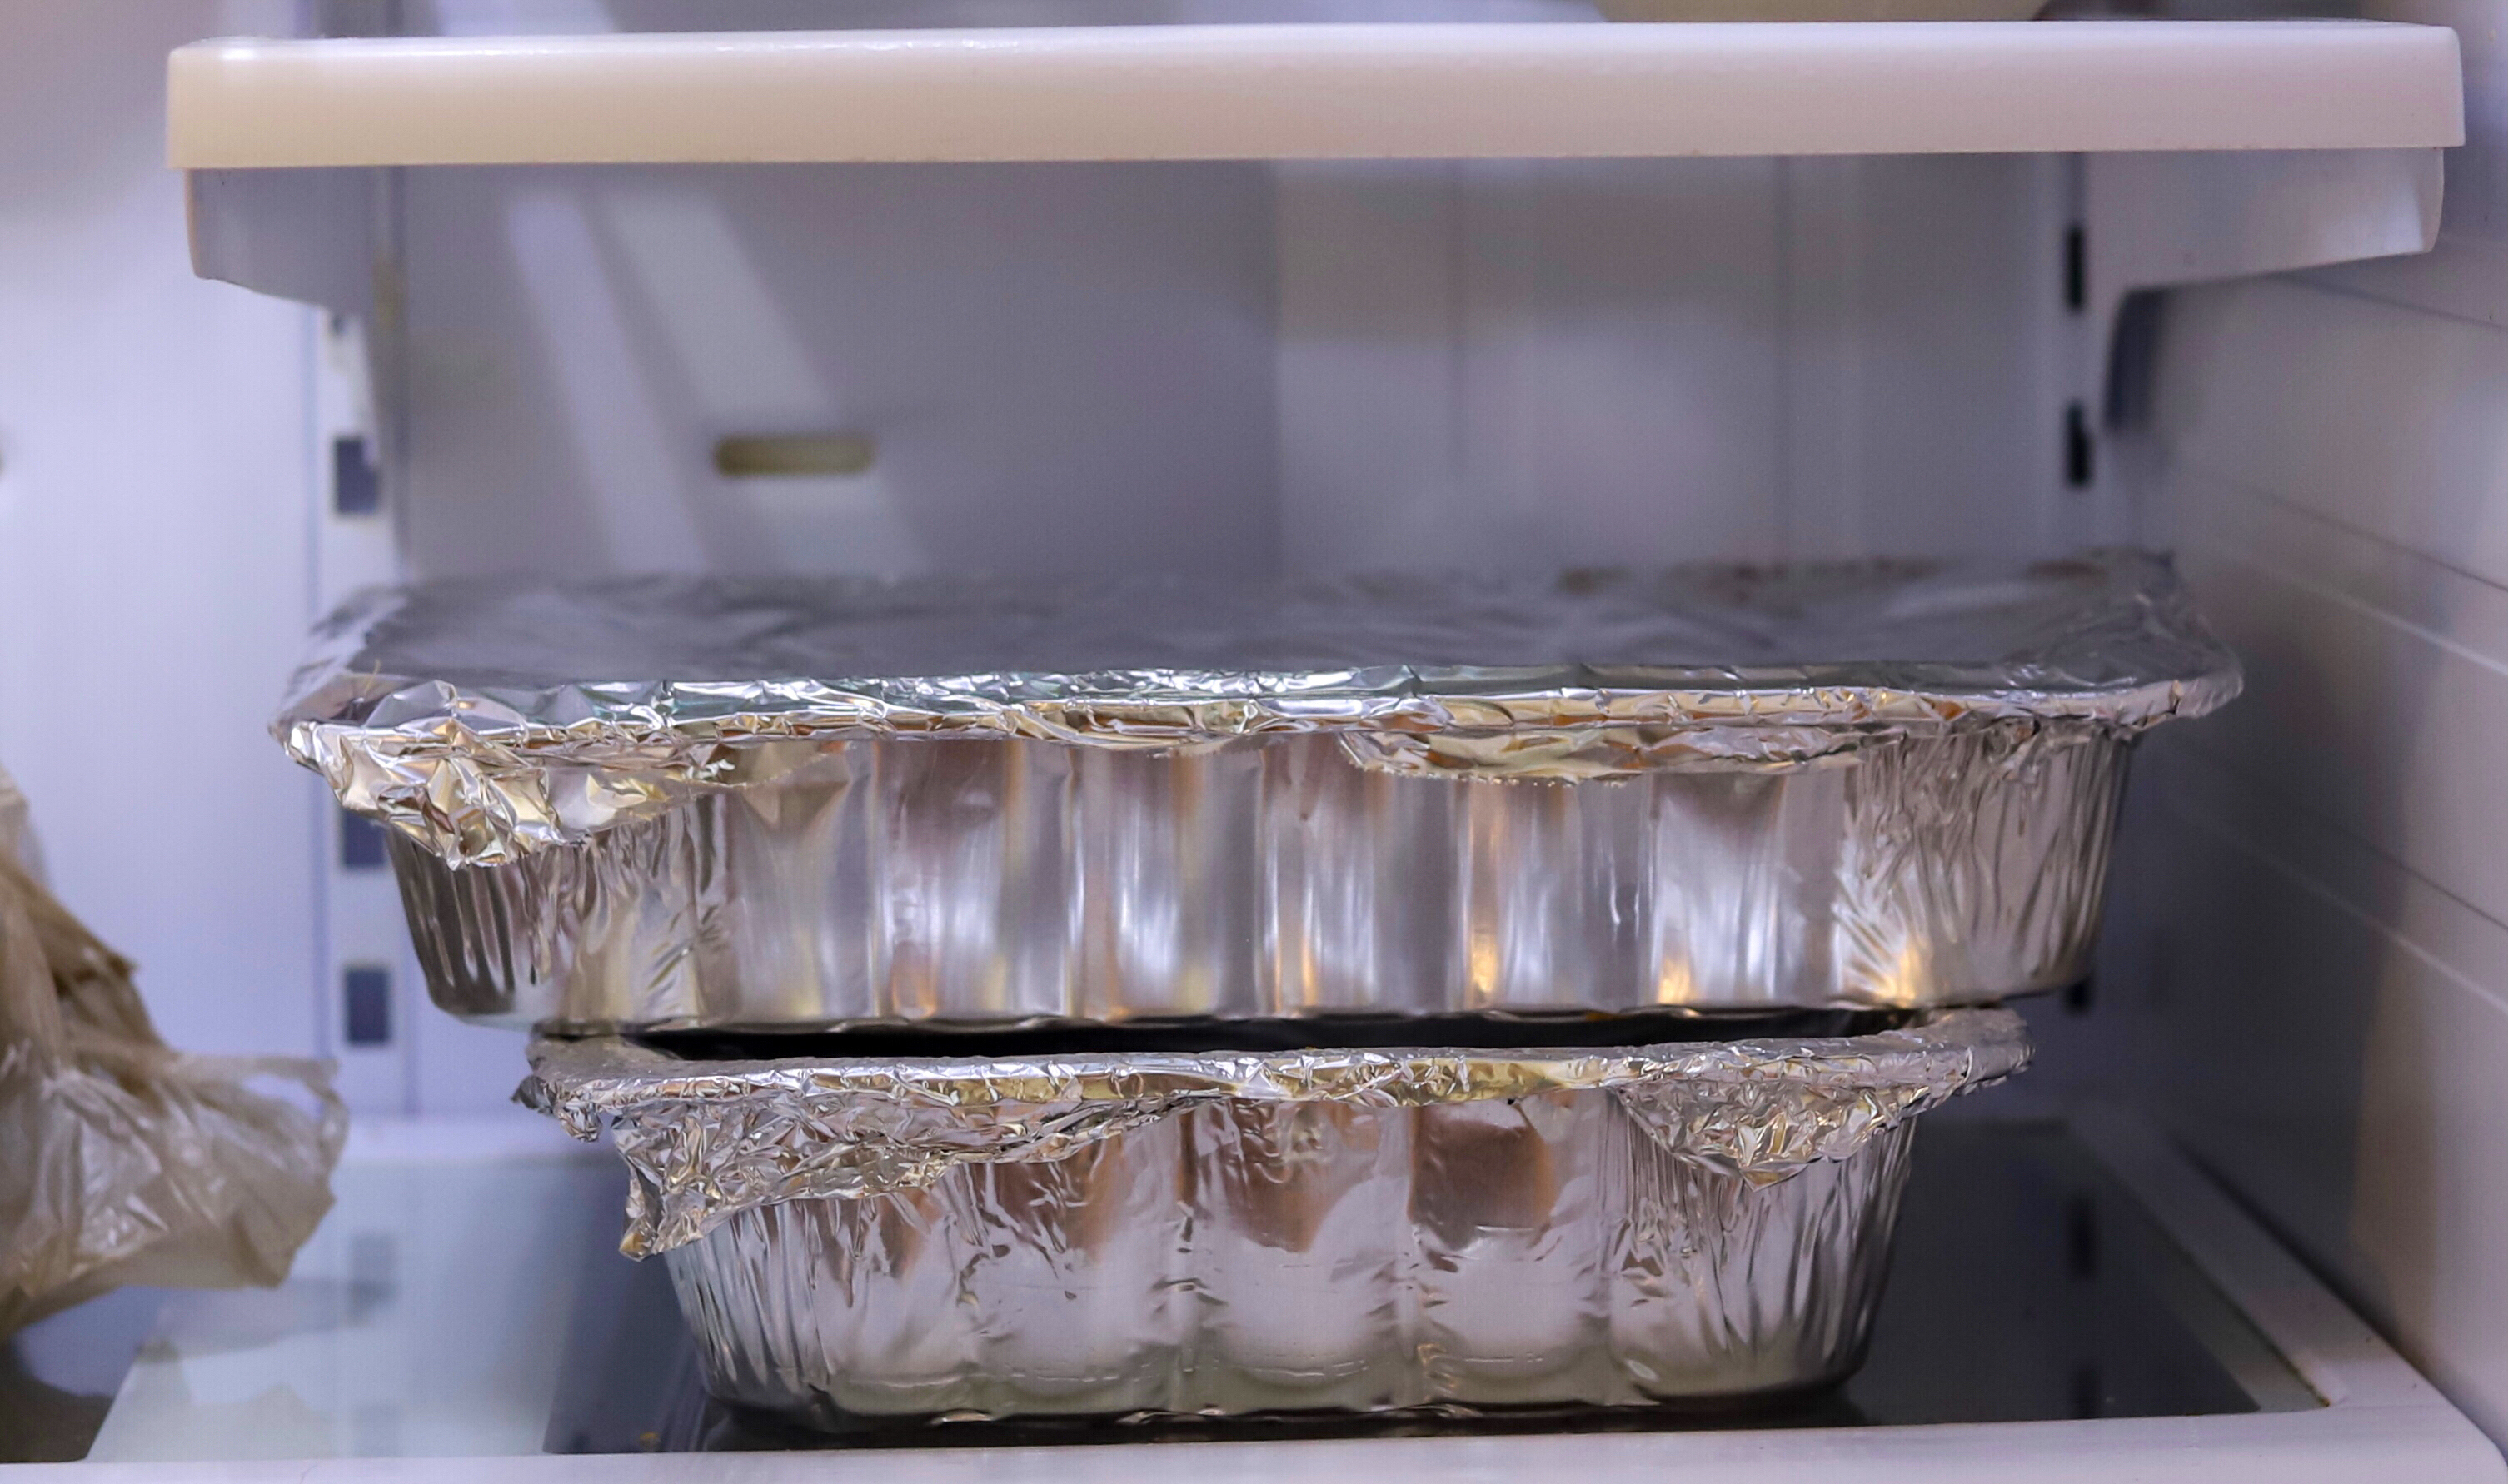 stacked aluminum containers in a refrigerator